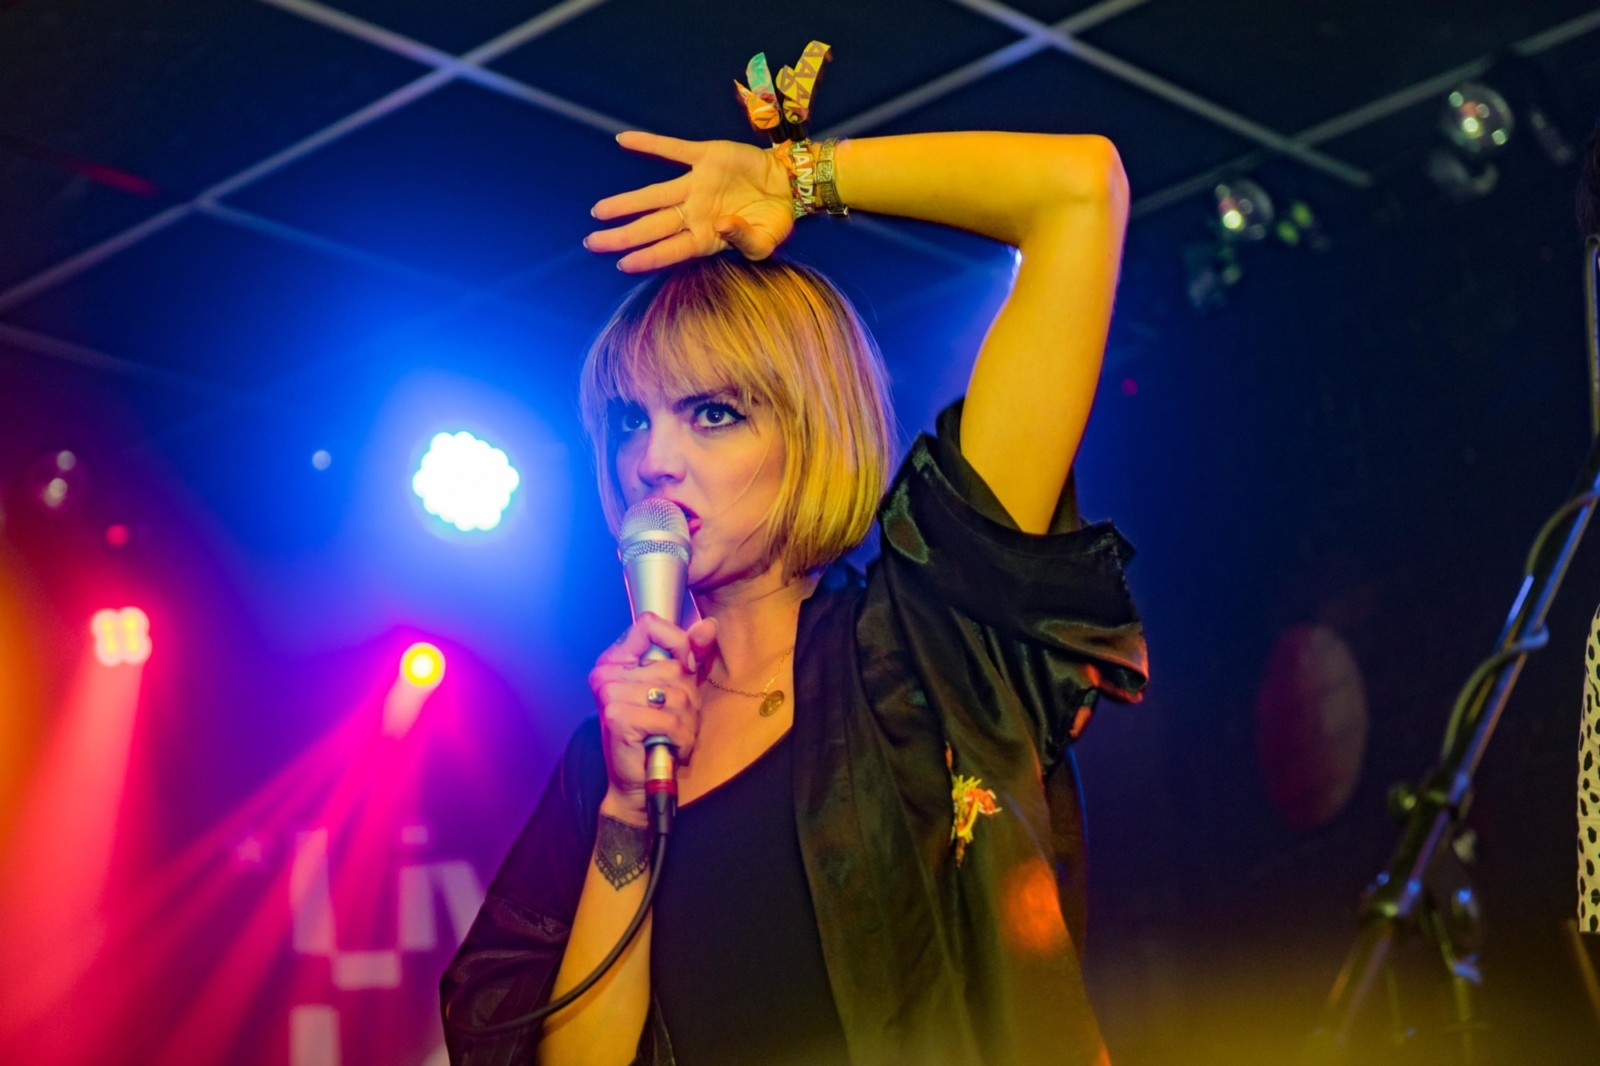 "We’re giving it everything we’ve got" - Anteros gear up for House of Vans at Bestival 2018